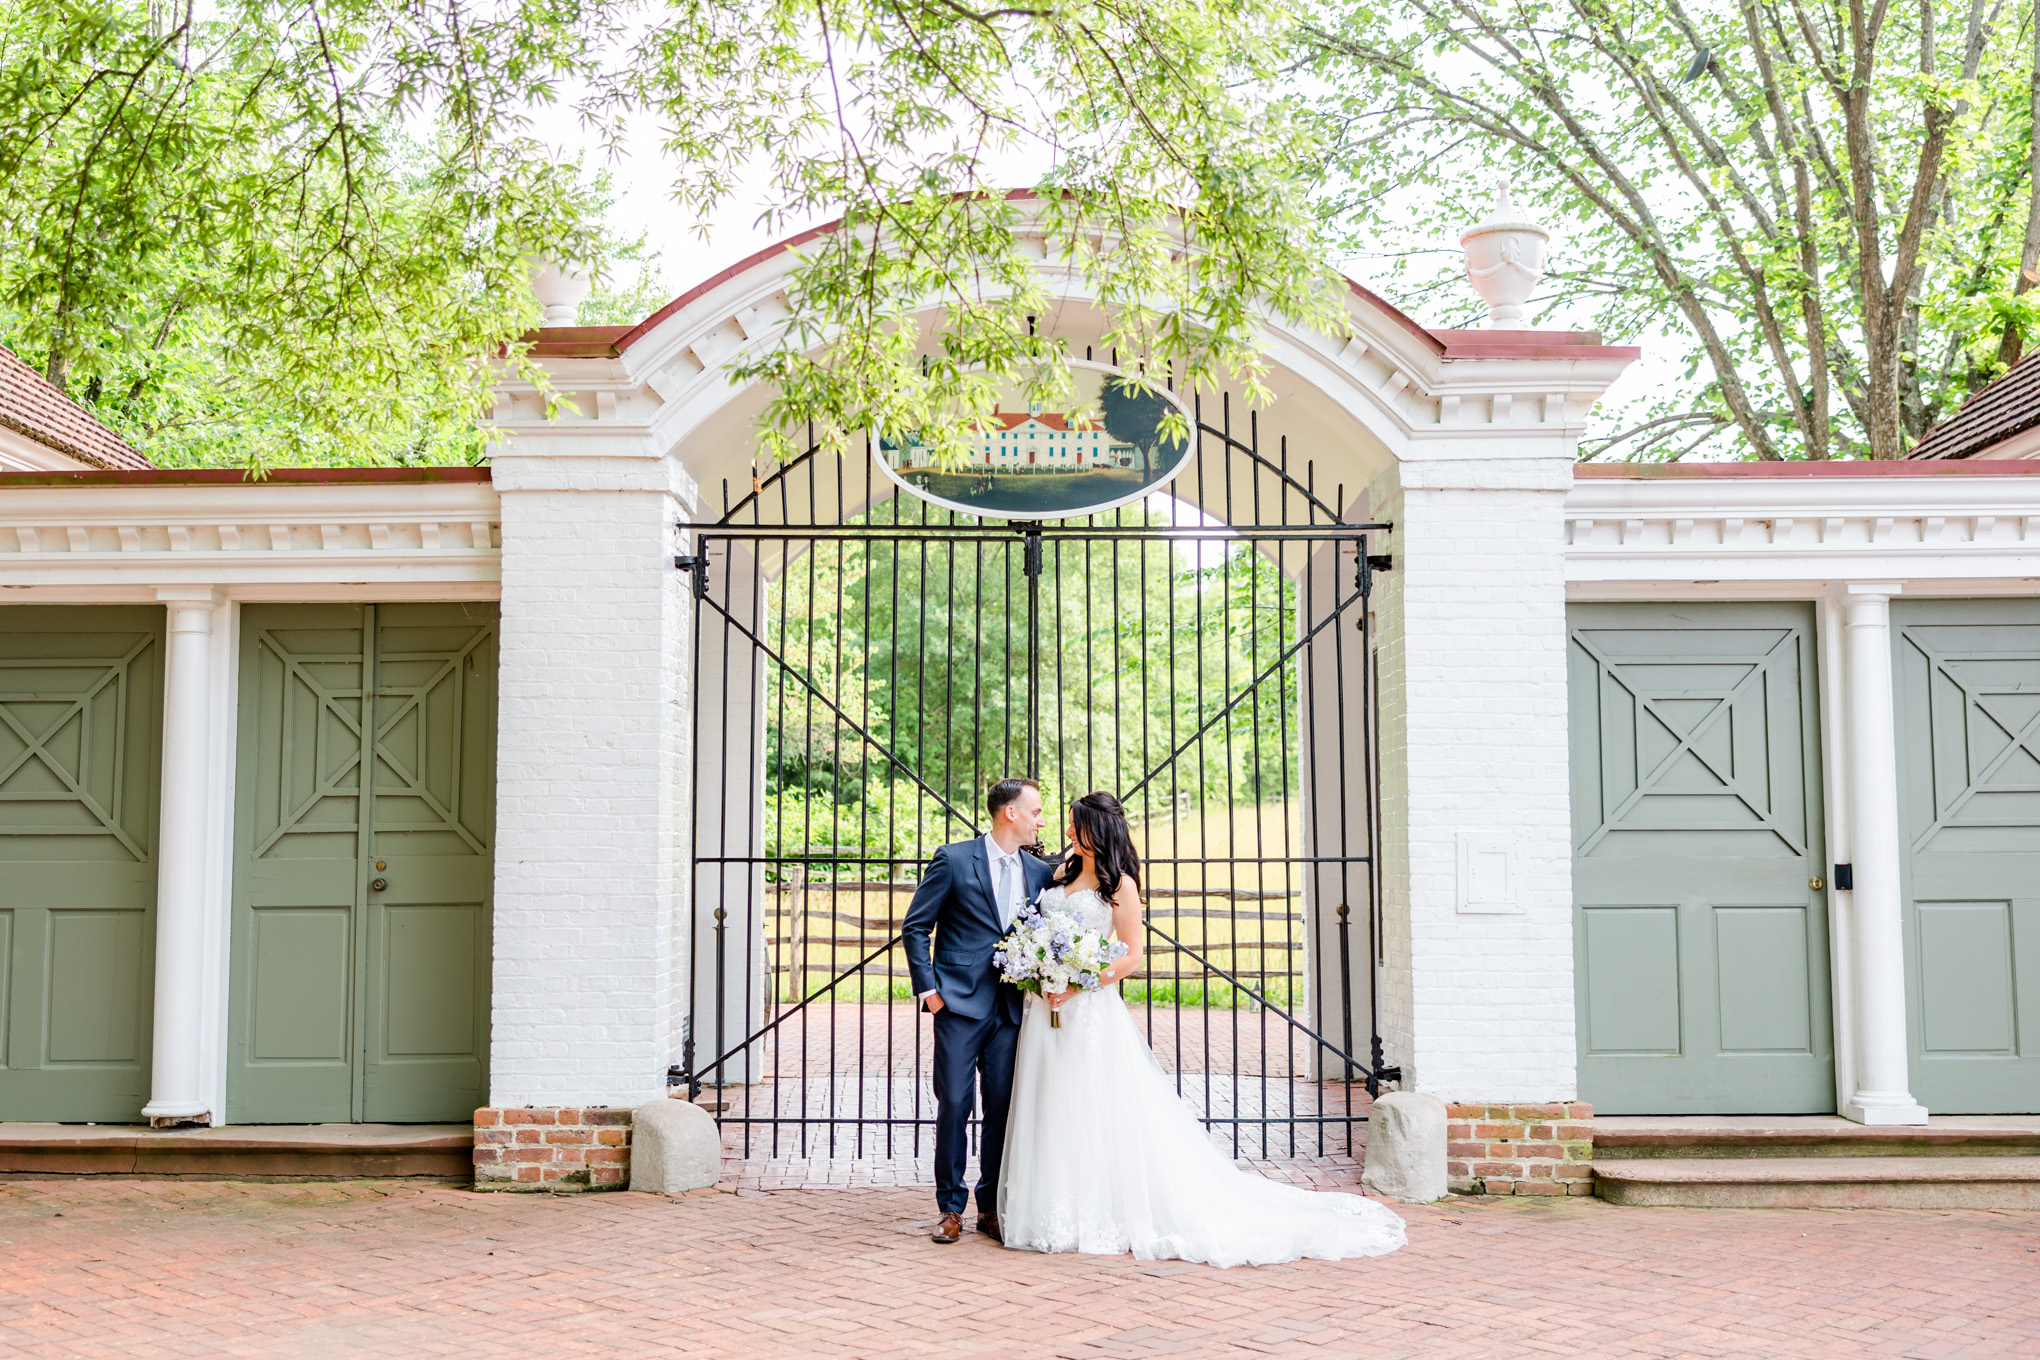 dreamy spring Mt. Vernon Inn wedding, Mount Vernon Inn Restaurant, Mount Vernon Virginia, classic D.C. wedding, classic spring wedding, white and blue wedding, steel blue aesthetic, spring wedding, spring wedding aesthetic, Rachel E.H. Photography, D.C. wedding photography, D.C. wedding photographer, couple smiling at each other, tall iron gate, bride and groom smiling, Generation Tux